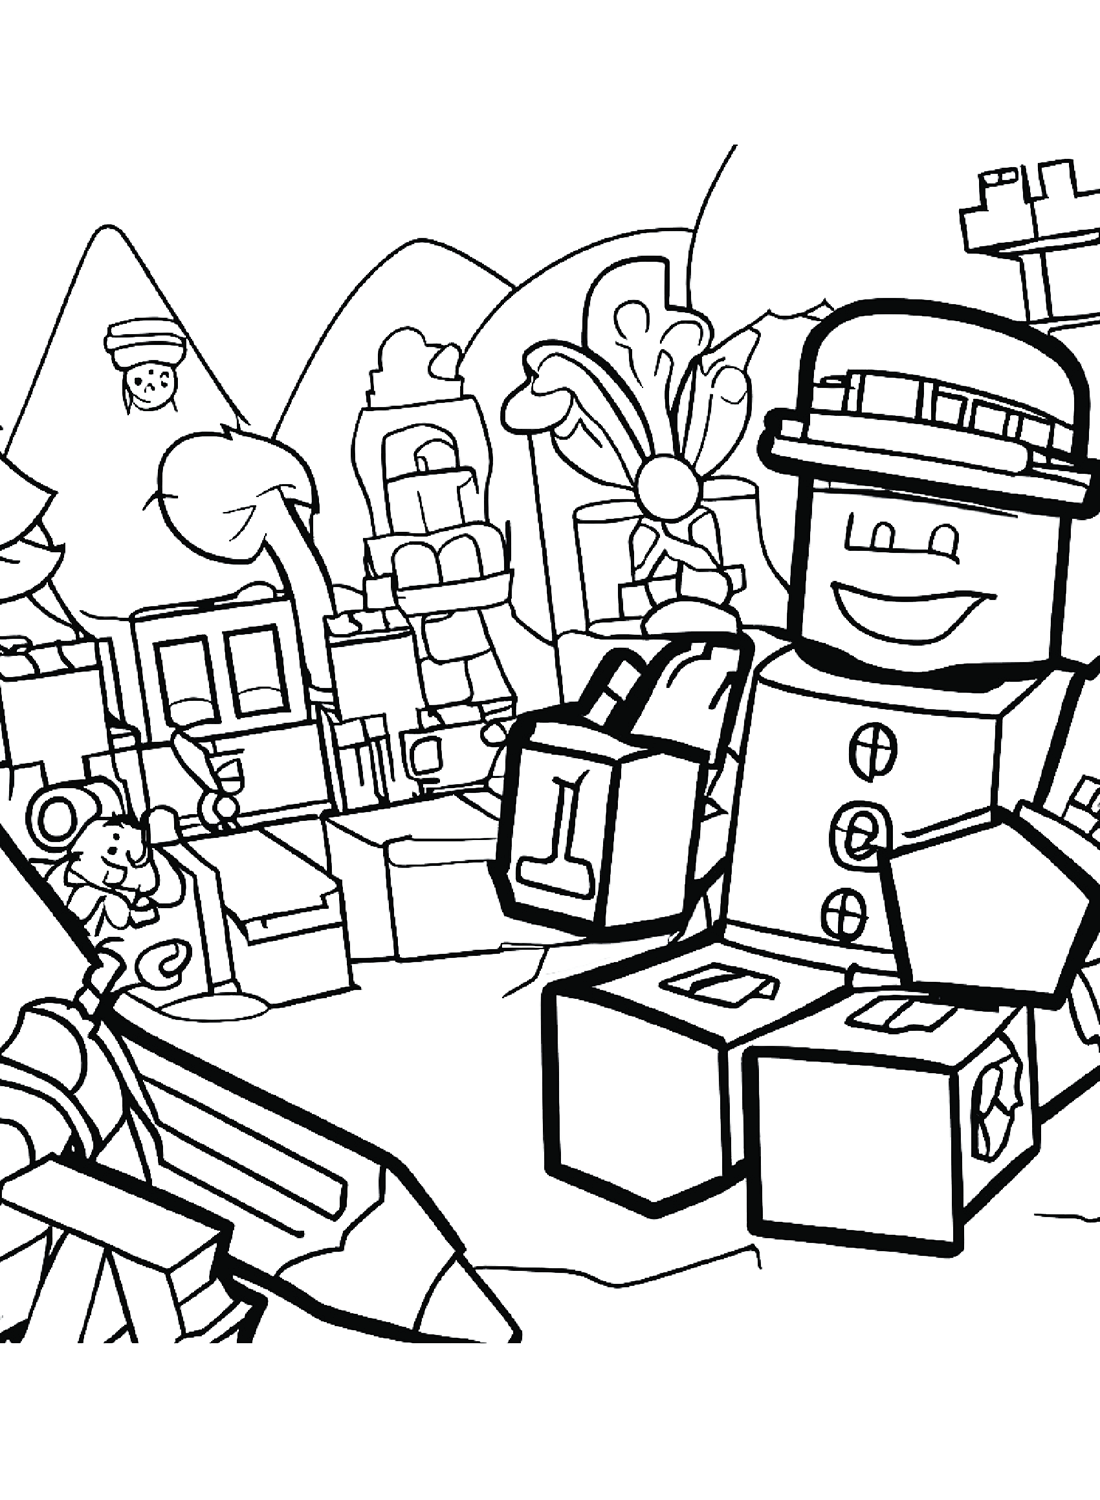 Roblox Coloring Pages To Print